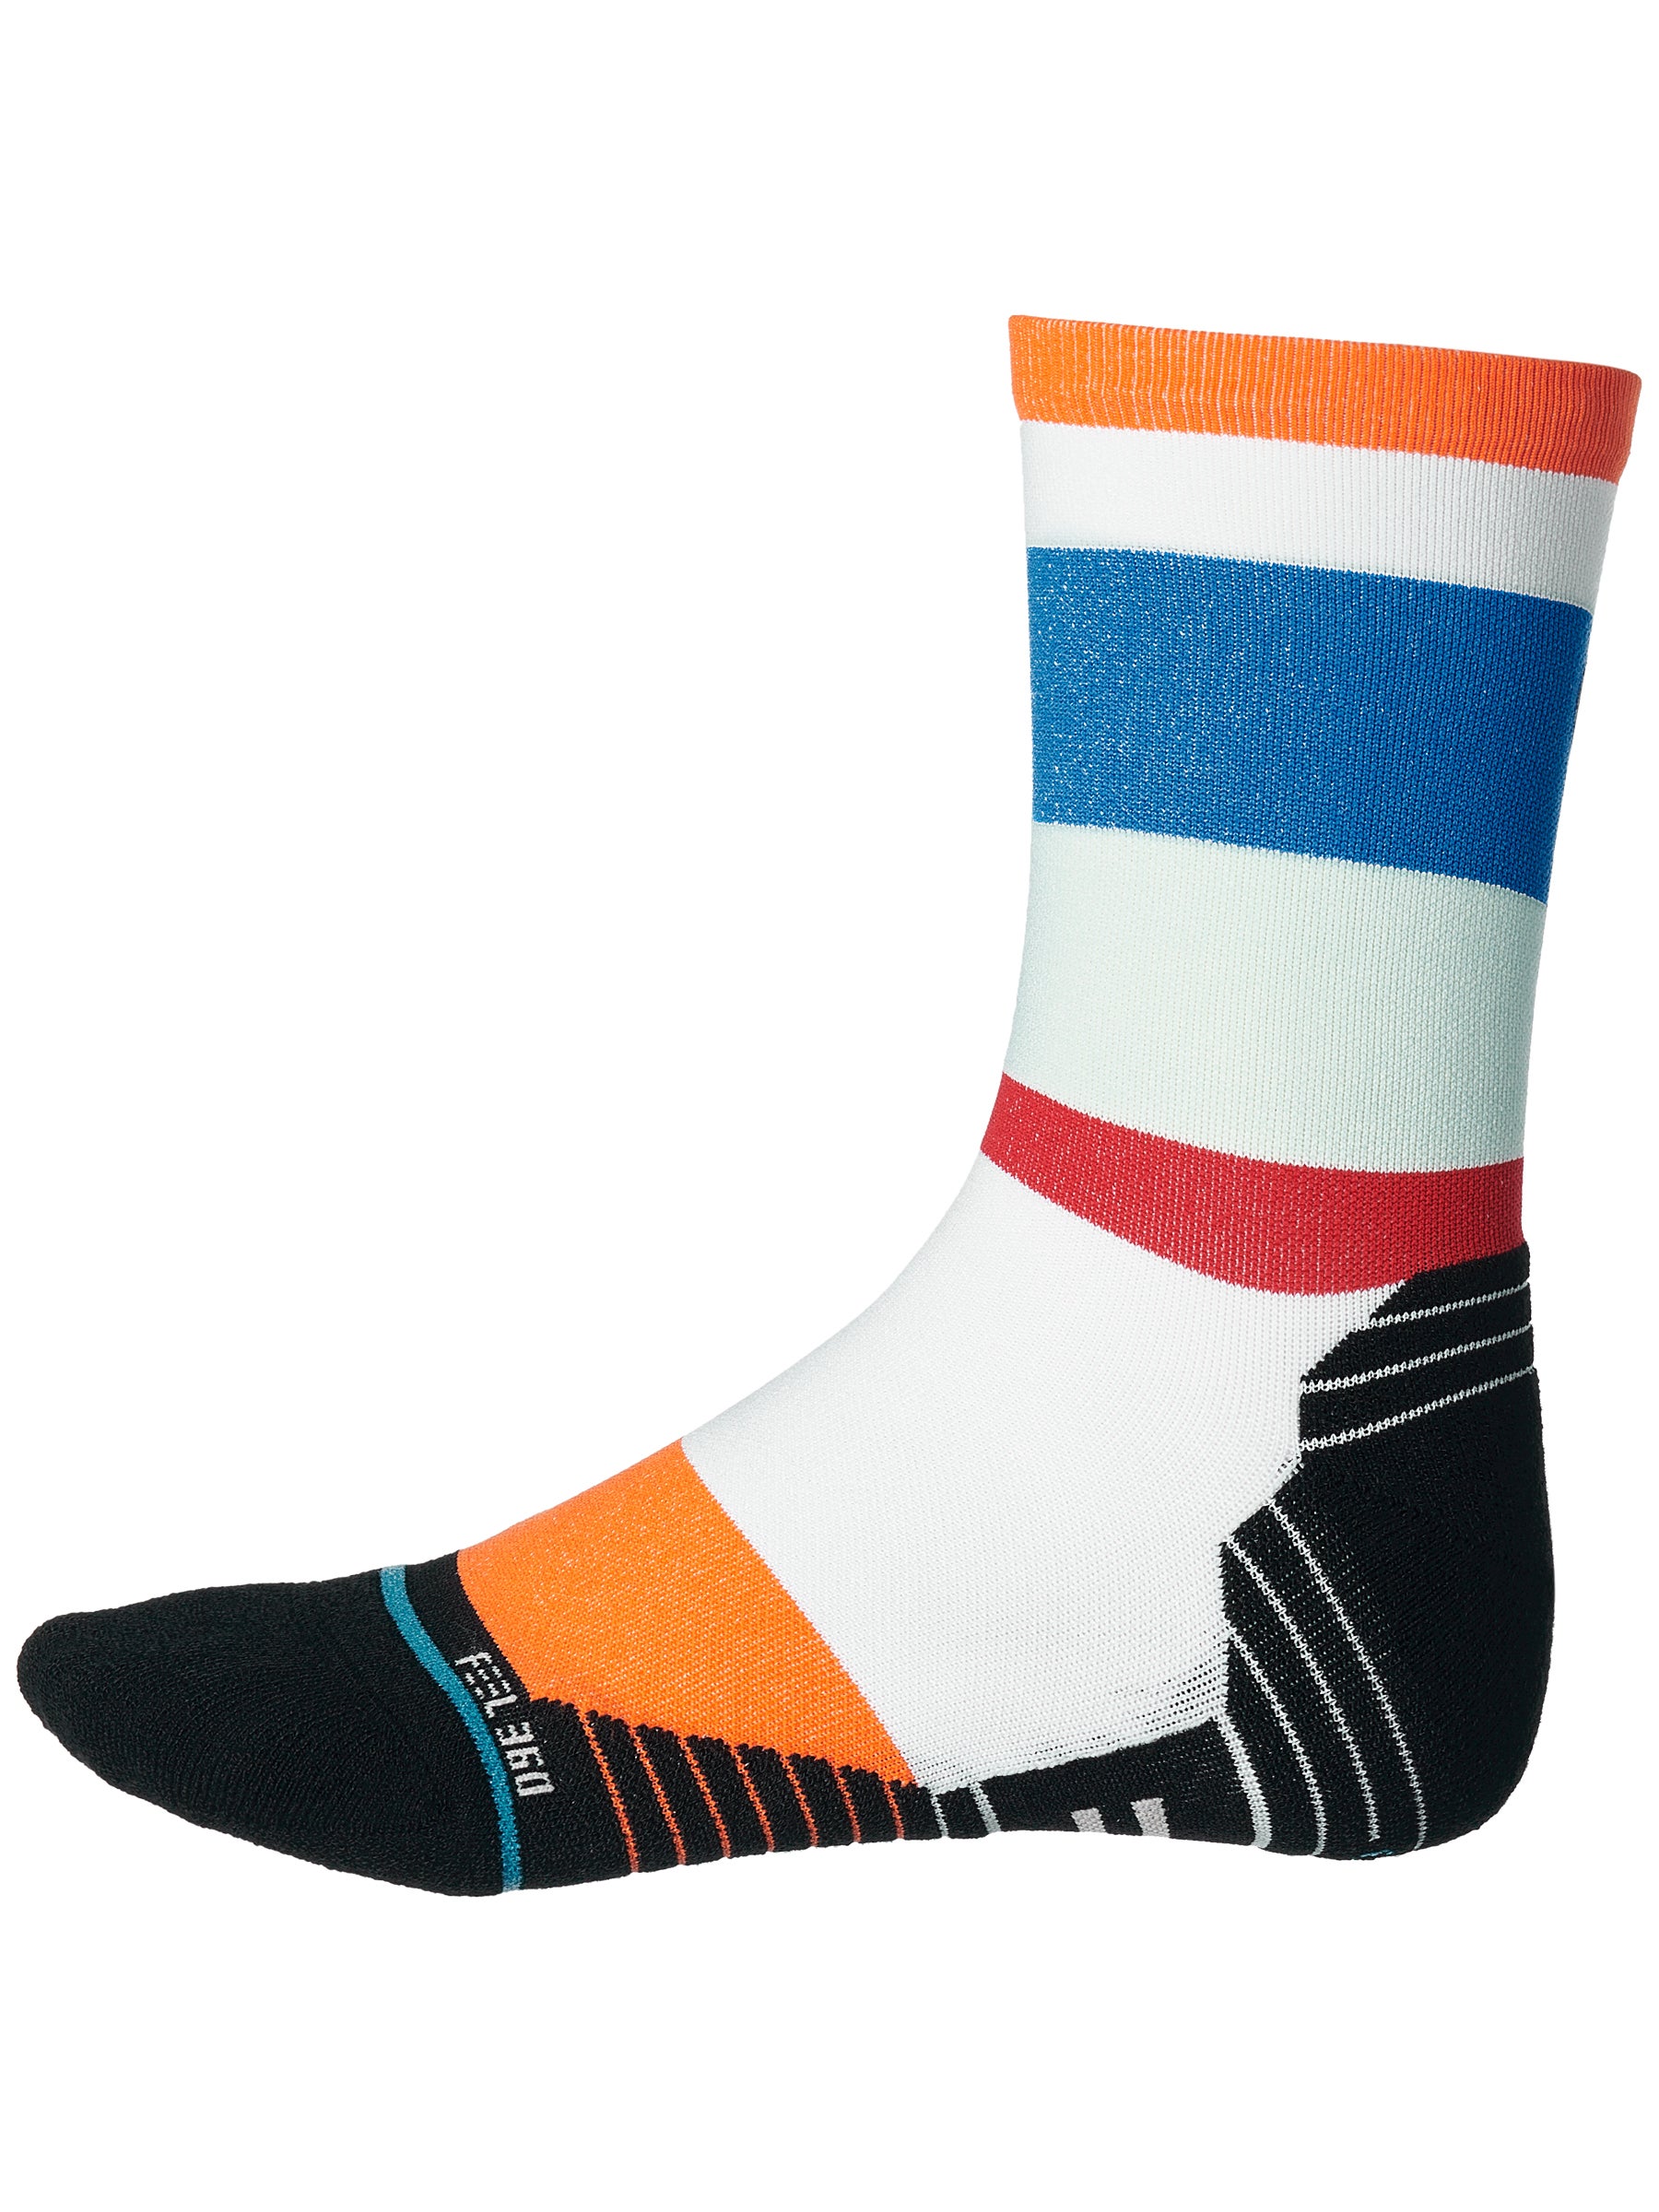 Details about   Stance Light Crew Cycling Socks Size L 9-13 